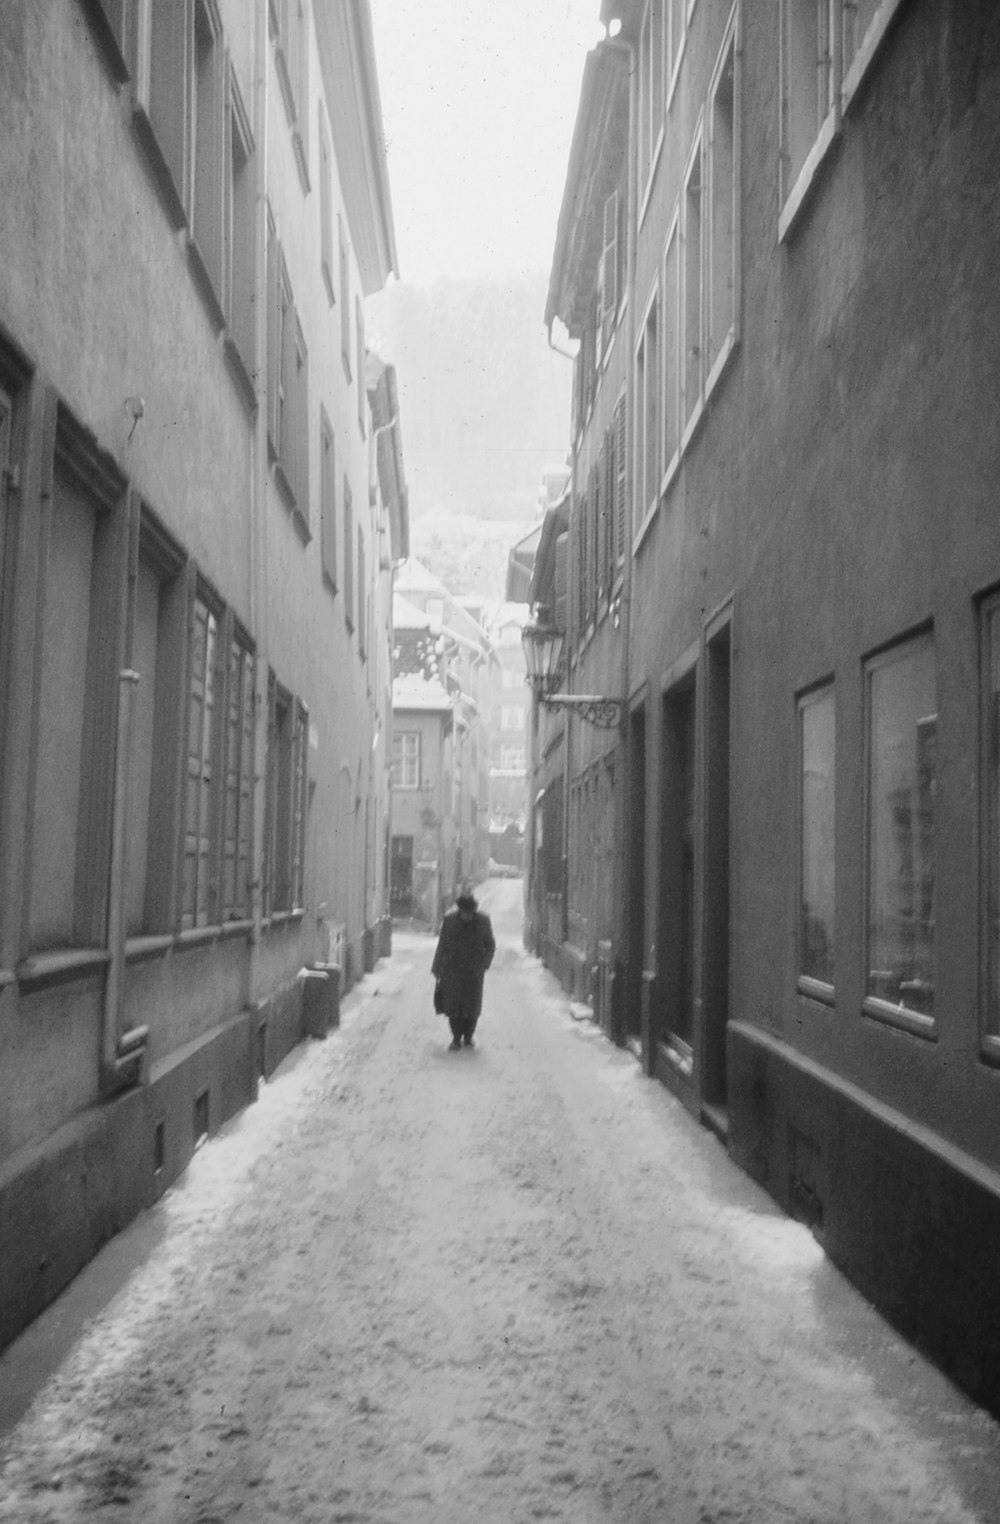 a black and white photo of a person walking down a snowy street